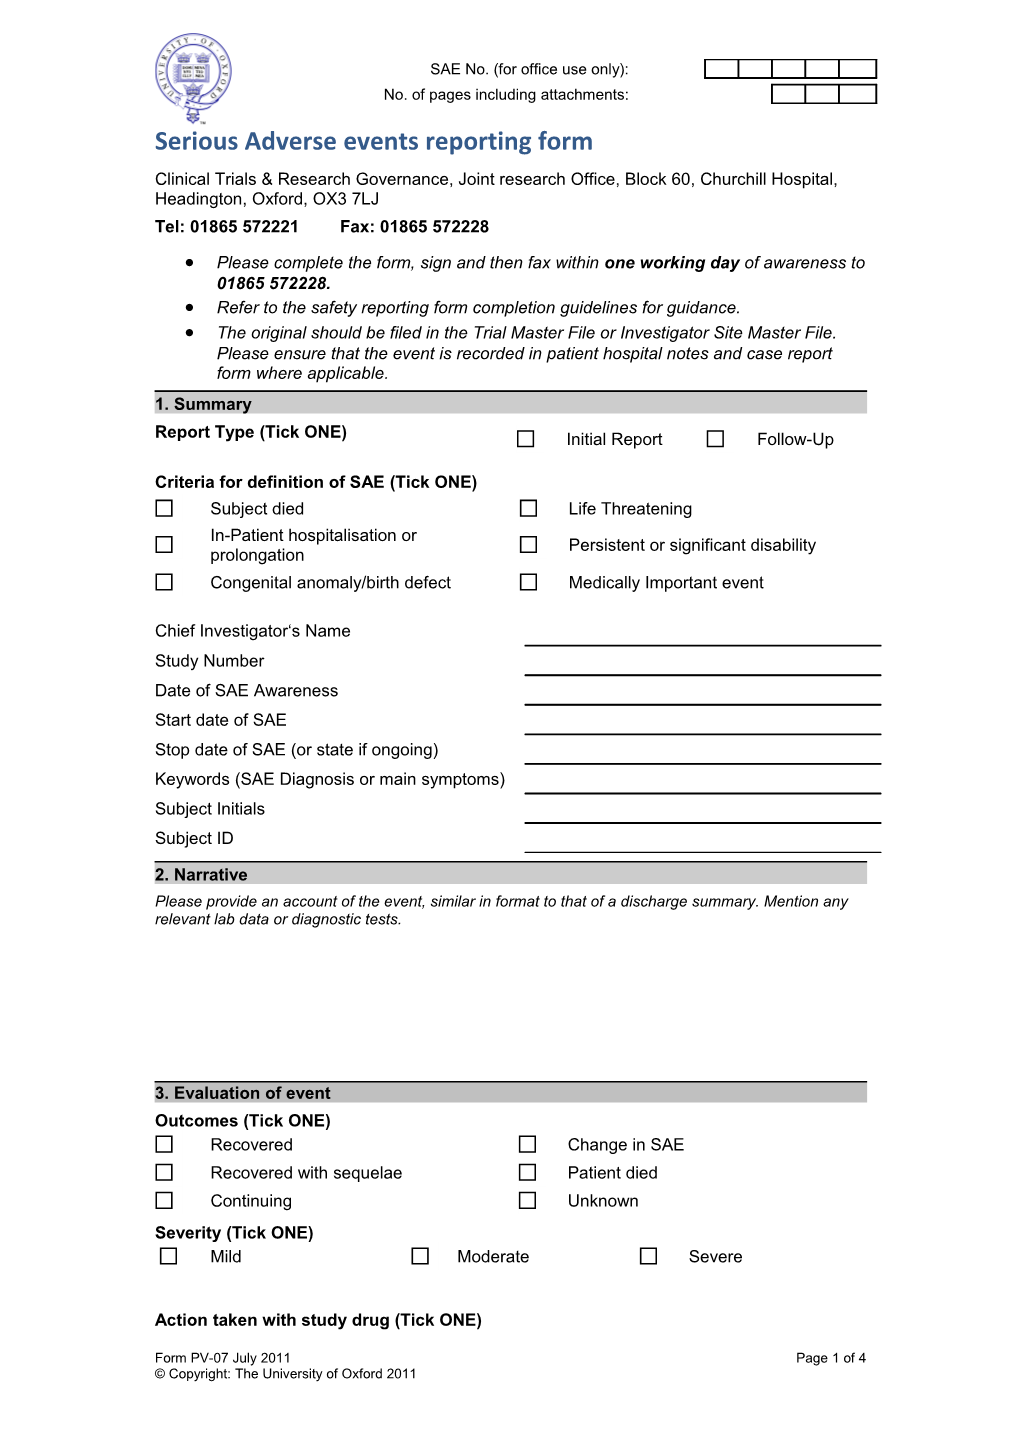 Serious Adverse Events Reporting Form